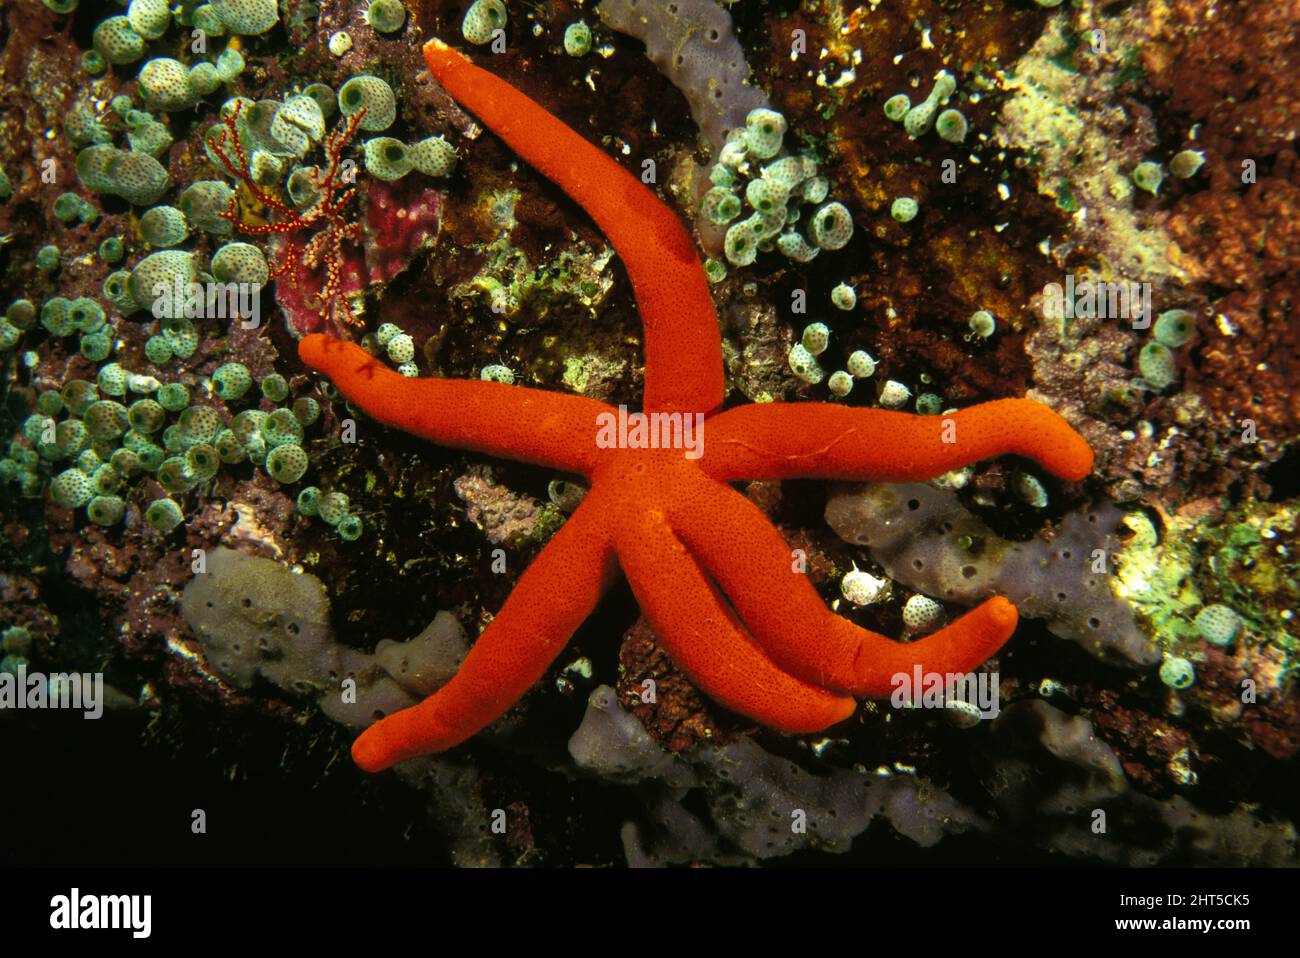 Orange sea star (Echinaster luzonicus), surrounded by green Urn ascidians (Didemnum molle). Stock Photo